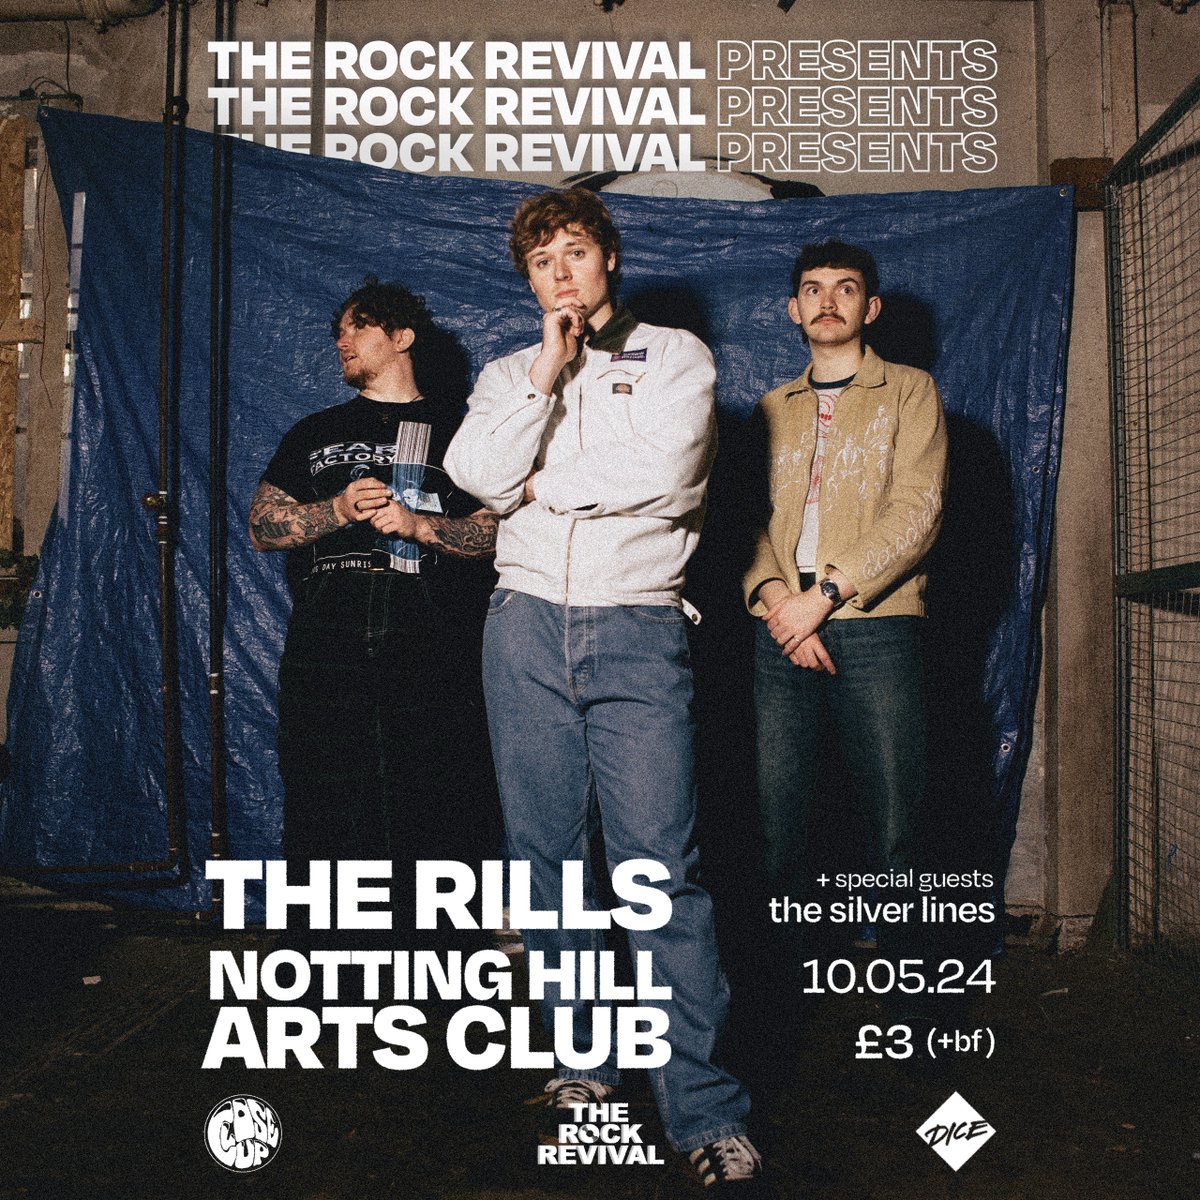 HERE WE GO AGAIN 💥 The Rock Revival Presents.... @TheRills & @TheSilverLines1 Notting Hill Arts Club - 10th May 2024 TICKETS ON SALE NOW 👇🏻 dice.fm/partner/dice/e…